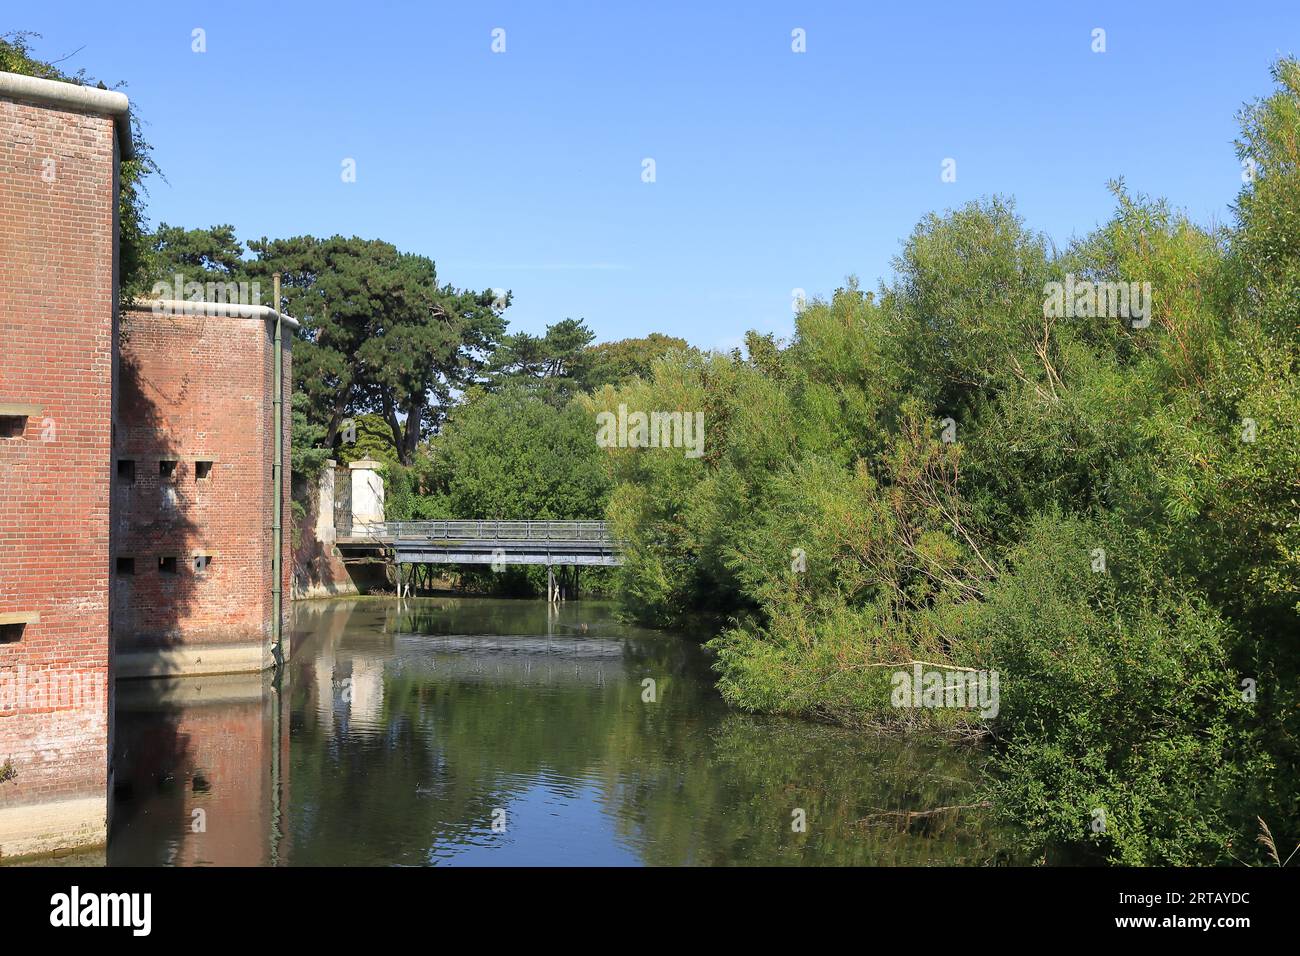 Fort Brockhurst, Gosport, Hampshire, England. September 10th 2023. Gosport Heritage Open Day. The fort was built between 1858 and 1862. View of part of the moat with part of the fort exterior walls, trees and a small bridge. Stock Photo